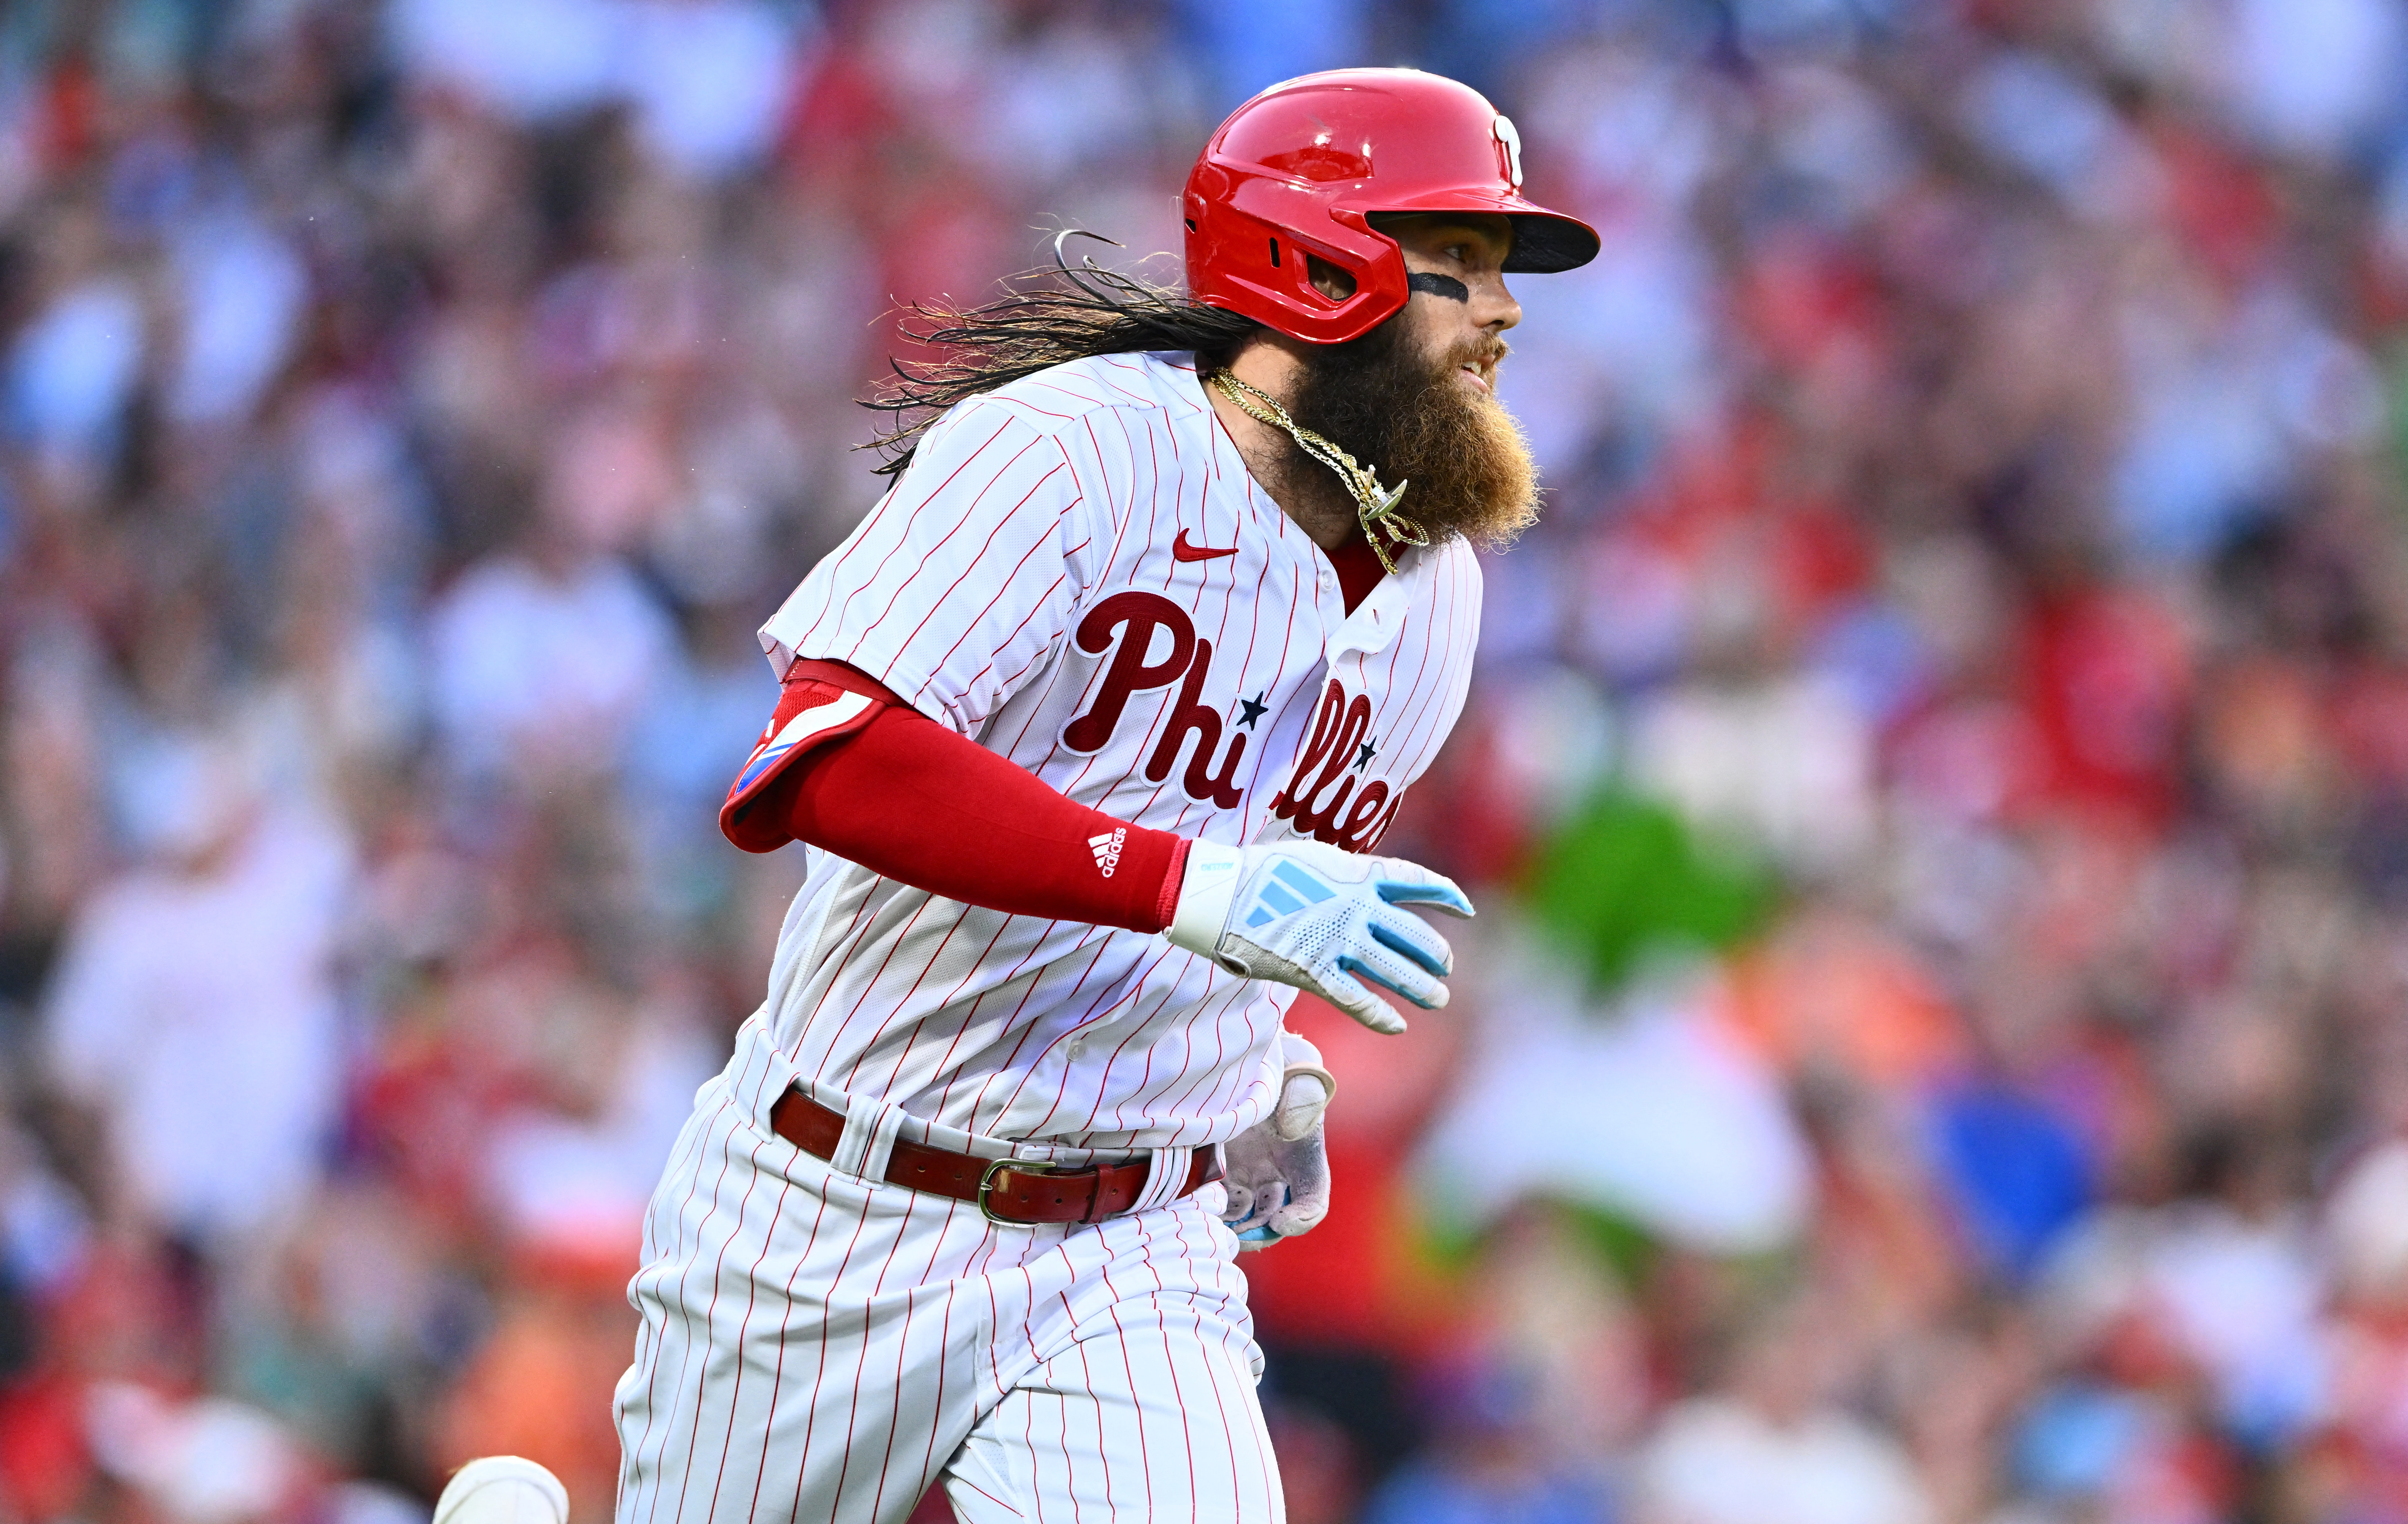 Phillies score twice in ninth for comeback win over Orioles